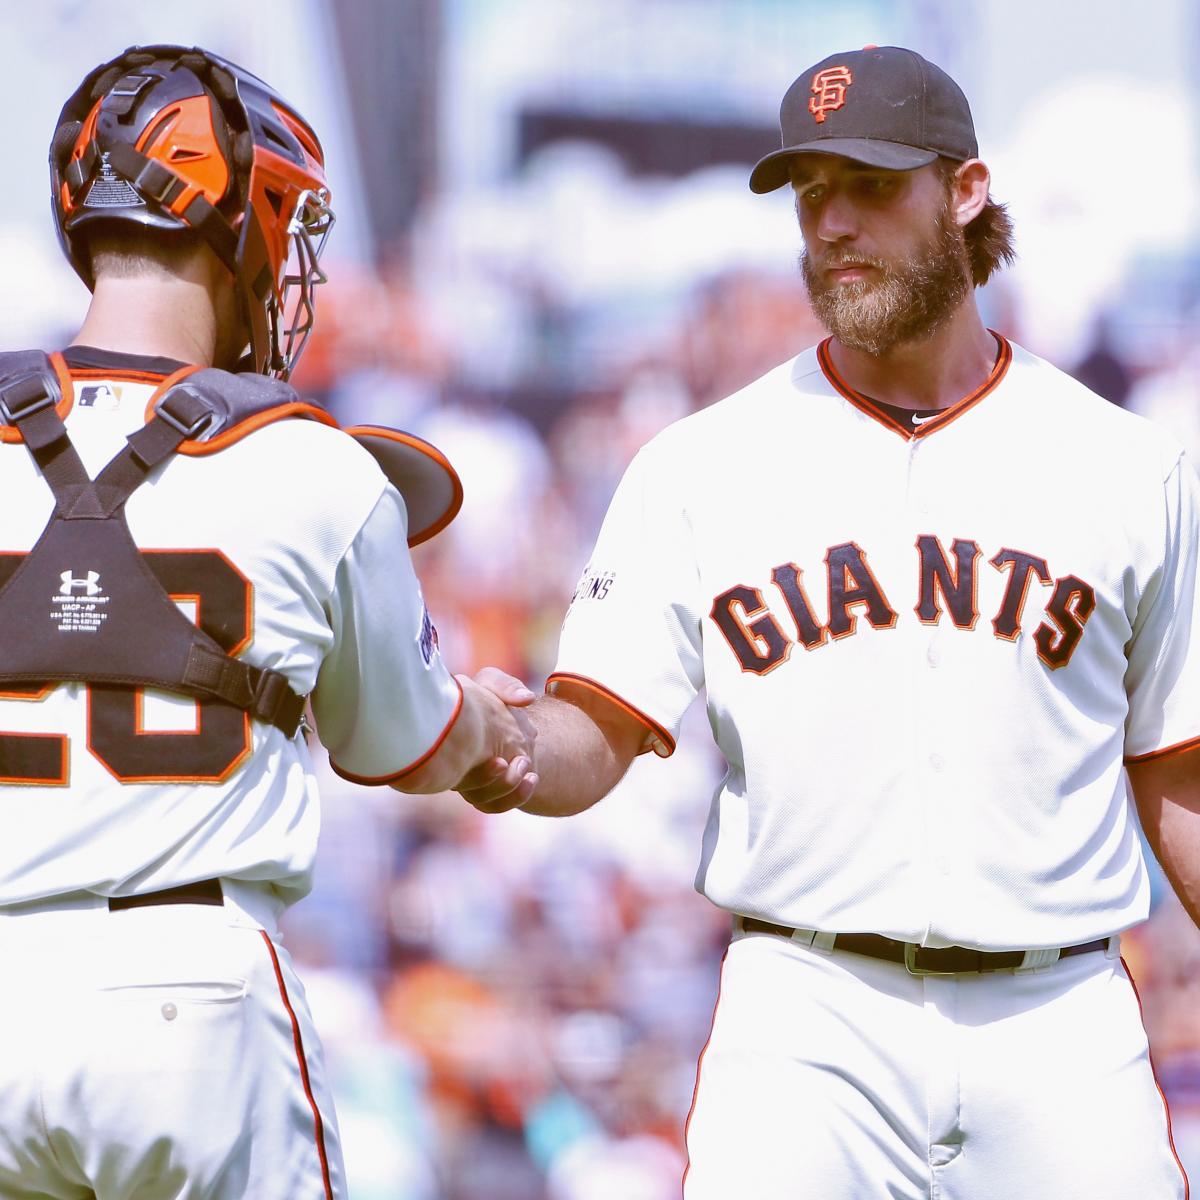 WATCH: After putting on show at batting practice, Madison Bumgarner says he  wants to participate in Home Run Derby – New York Daily News